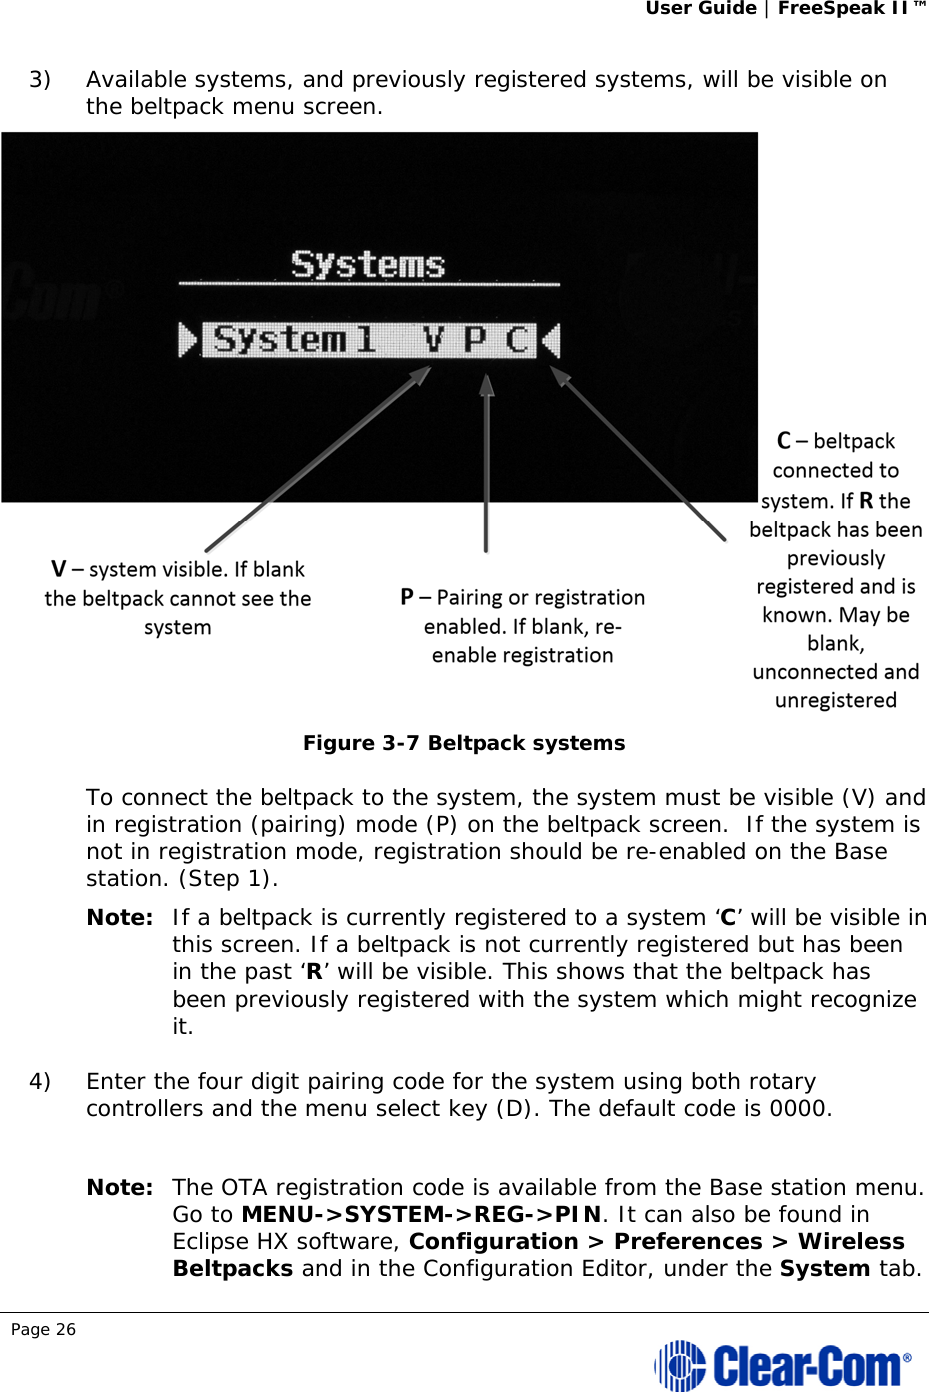 User Guide | FreeSpeak II™  Page 26  3) Available systems, and previously registered systems, will be visible on the beltpack menu screen.   Figure 3-7 Beltpack systems To connect the beltpack to the system, the system must be visible (V) and in registration (pairing) mode (P) on the beltpack screen.  If the system is not in registration mode, registration should be re-enabled on the Base station. (Step 1).  Note: If a beltpack is currently registered to a system ‘C’ will be visible in this screen. If a beltpack is not currently registered but has been in the past ‘R’ will be visible. This shows that the beltpack has been previously registered with the system which might recognize it.  4) Enter the four digit pairing code for the system using both rotary controllers and the menu select key (D). The default code is 0000.   Note: The OTA registration code is available from the Base station menu. Go to MENU-&gt;SYSTEM-&gt;REG-&gt;PIN. It can also be found in Eclipse HX software, Configuration &gt; Preferences &gt; Wireless Beltpacks and in the Configuration Editor, under the System tab. 